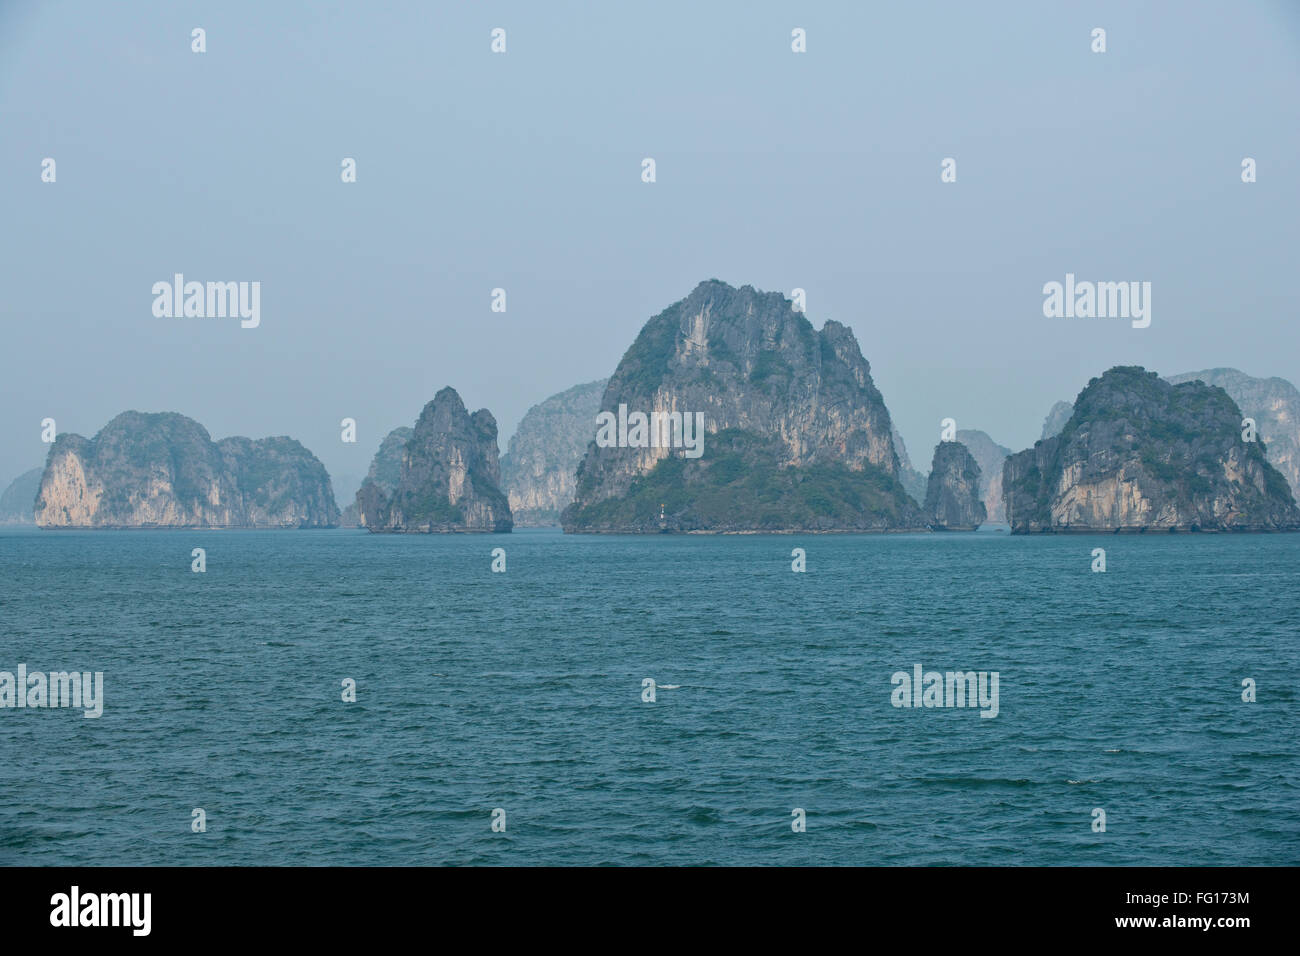 Misty image of limestone karsts or islands rising out of the sea in Halong Bay, Northern Vietnam, January Stock Photo